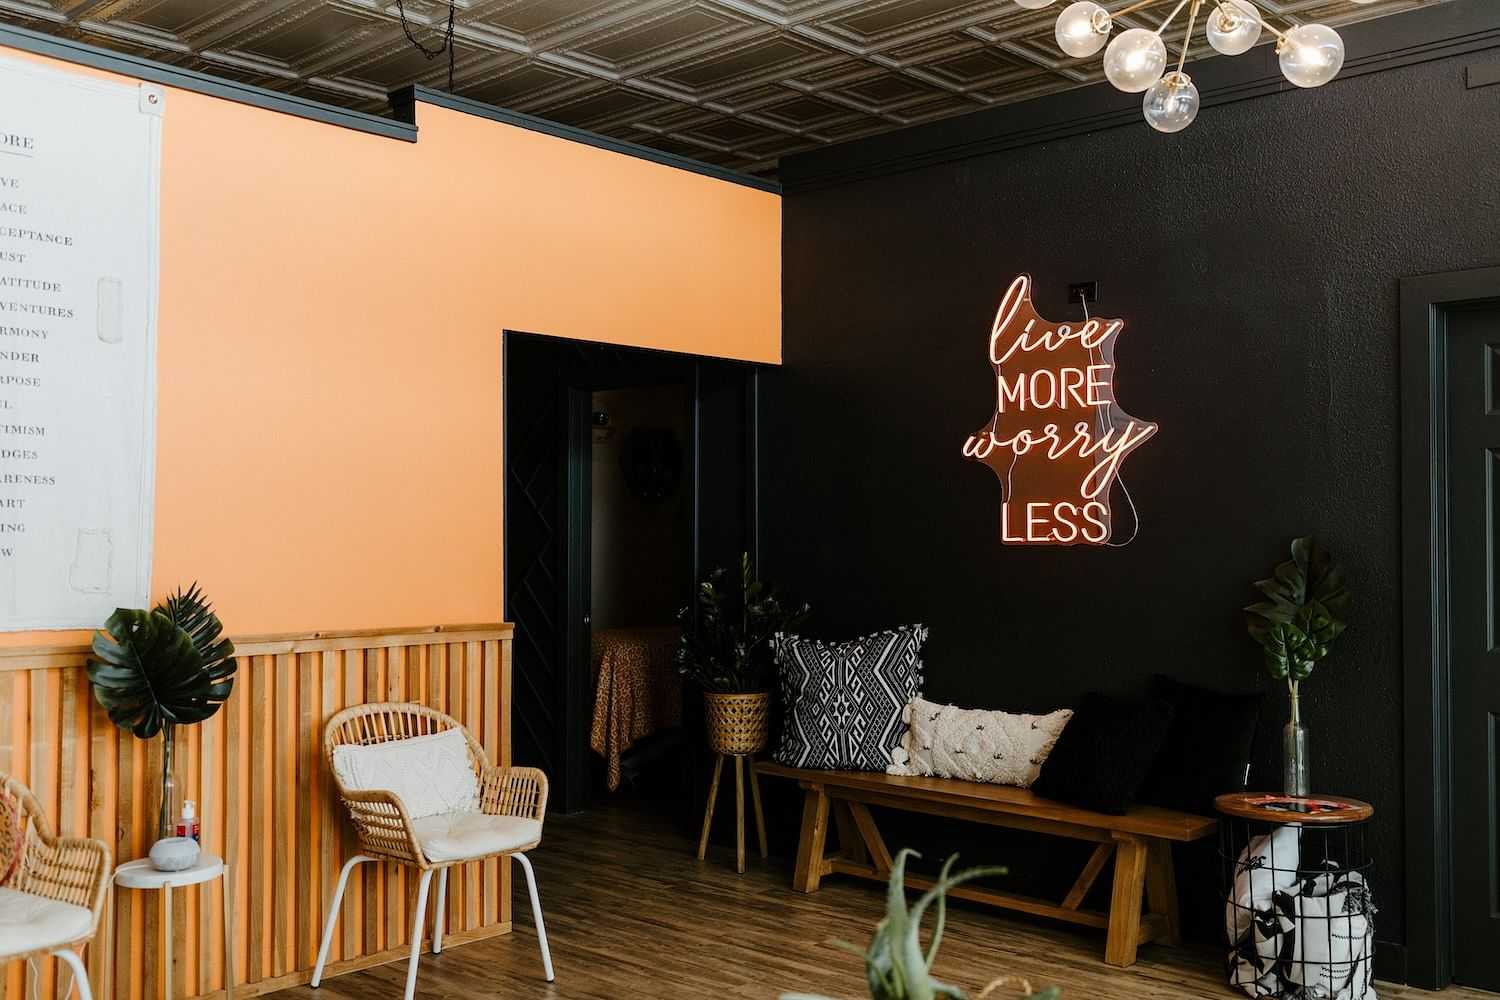 Neon sign on a wall reading 'Live More Worry Less' in a stylish indoor setting.